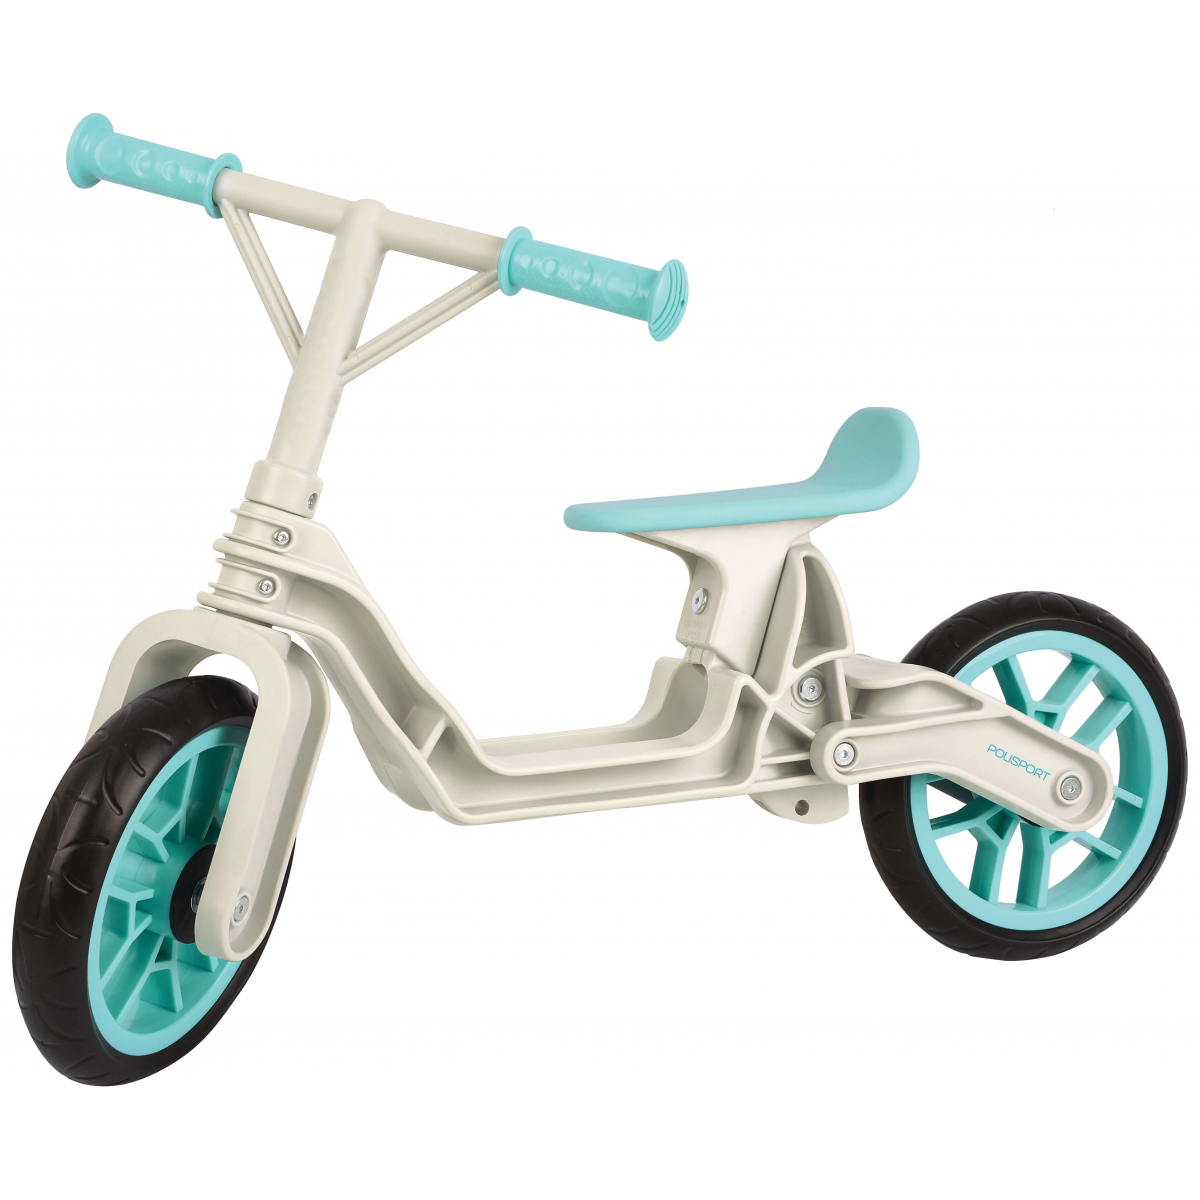 Balance Bike - Learning Bicycle for Kids Cream and Mint - 8612000001_Cream  Mint